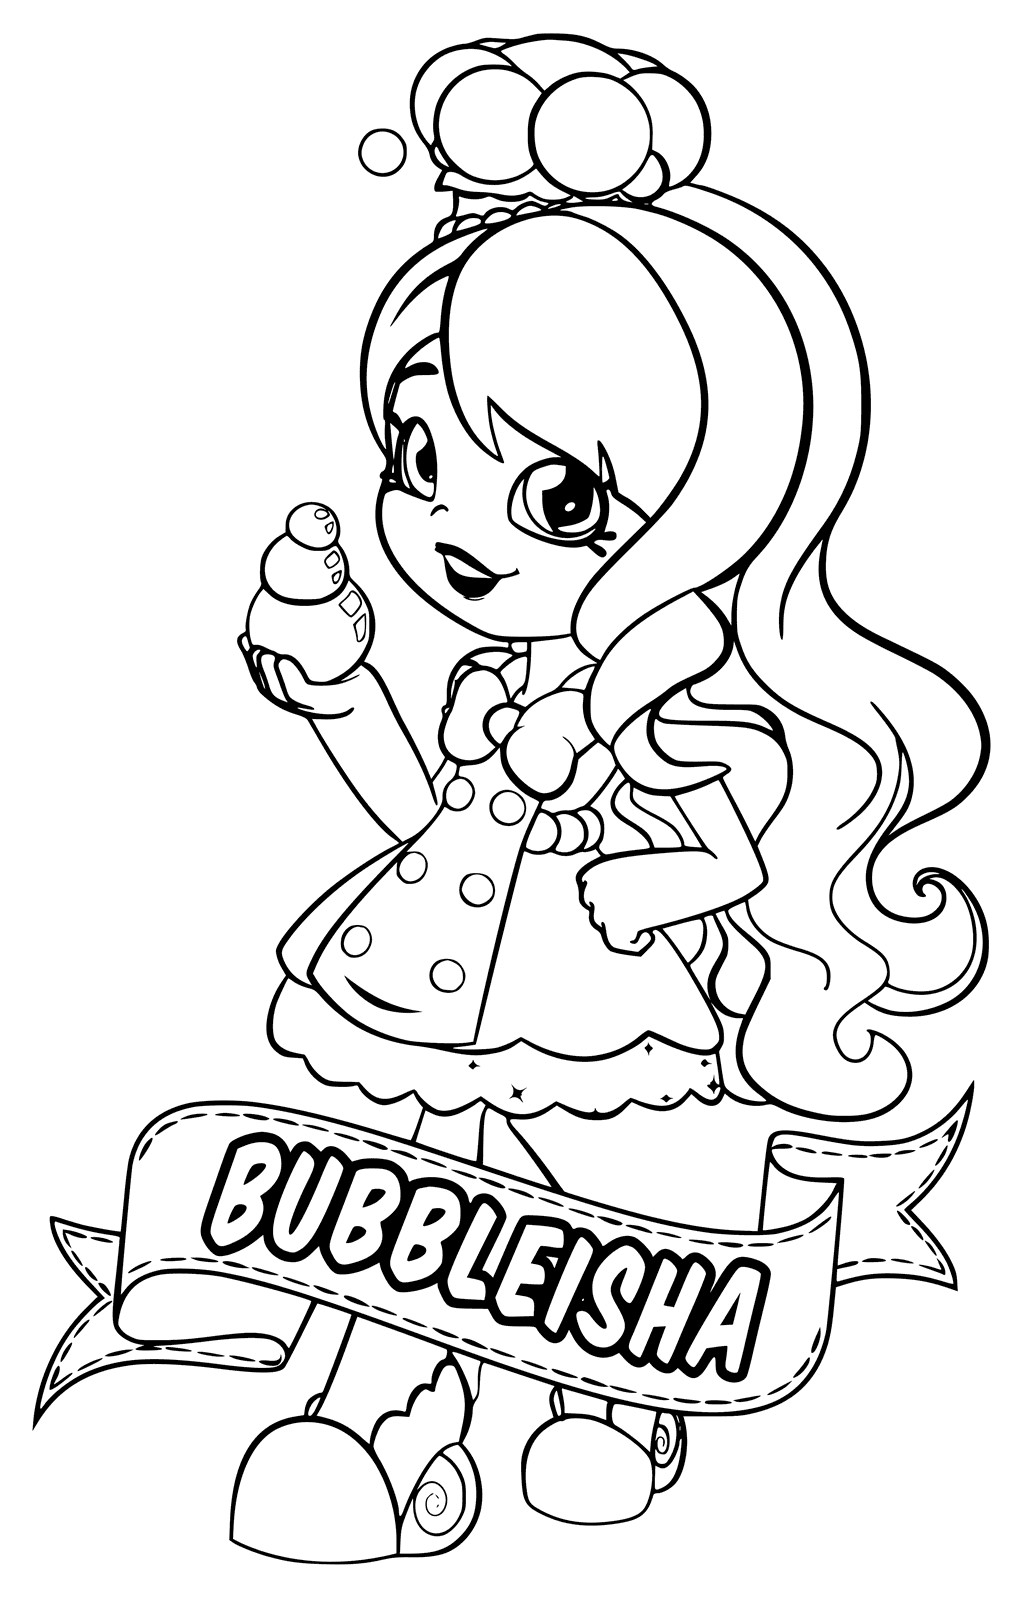 Coloring Pages For Girls Shopkins
 Shoppies Coloring Pages SHOPKINS